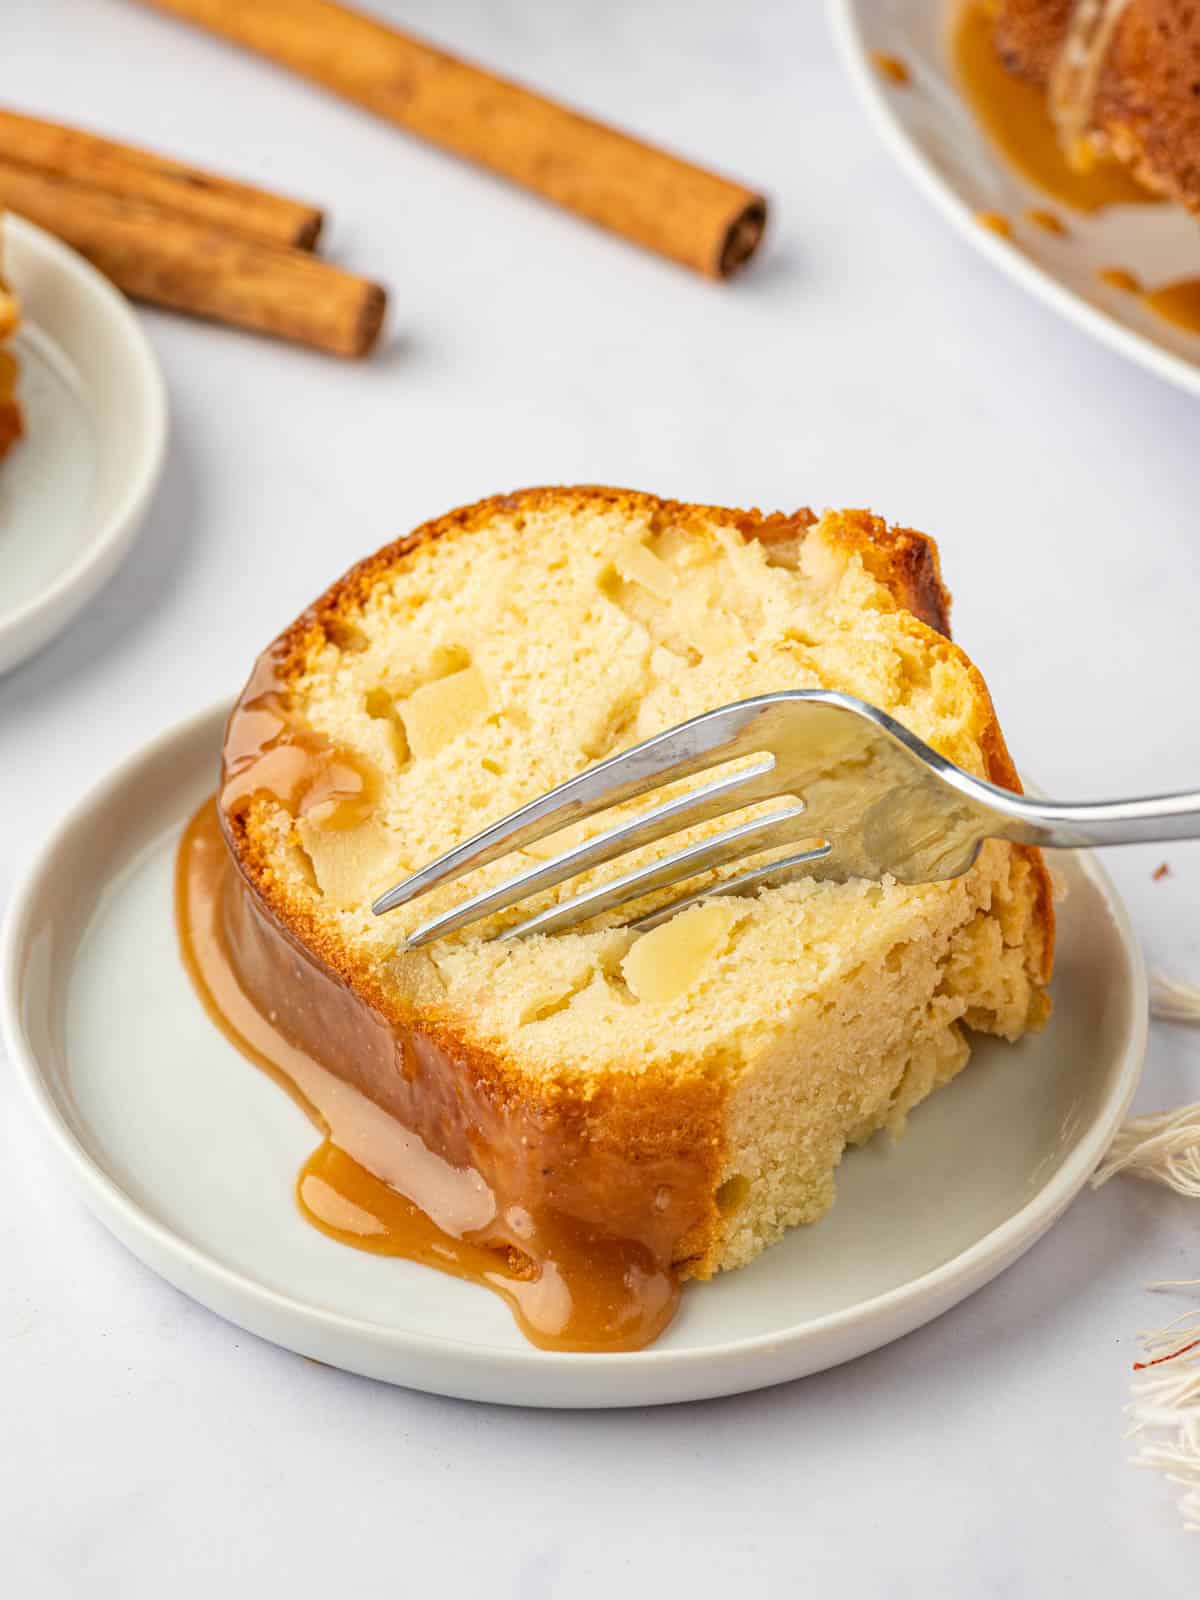 A fork slices into a piece of pear cake.